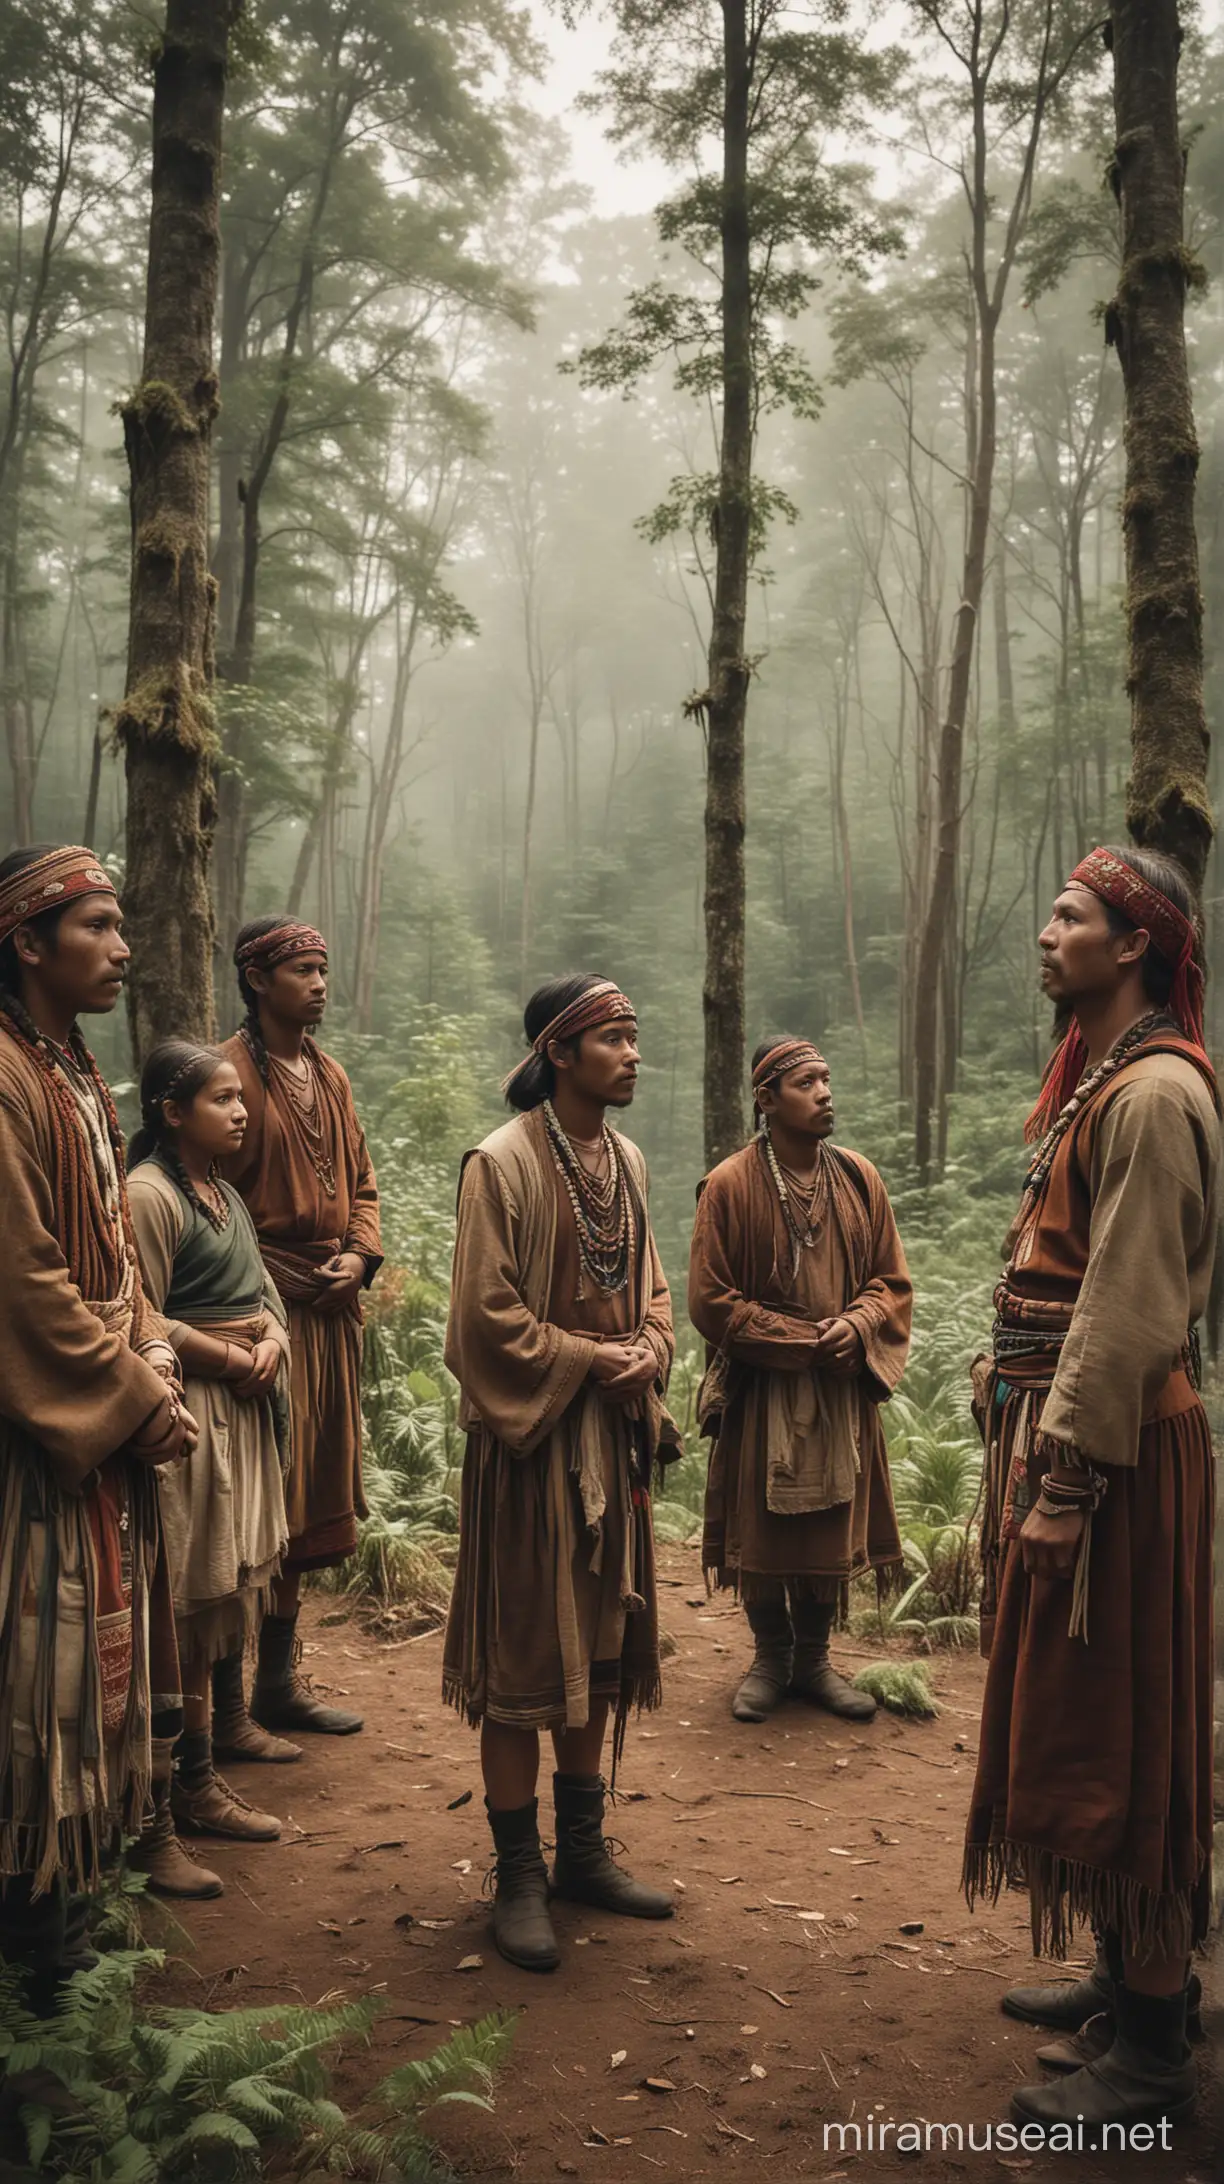 A group of Fore tribe members, dressed in traditional attire, gather together anxiously, looking around them. In the background, there's a mysterious forest landscape.

